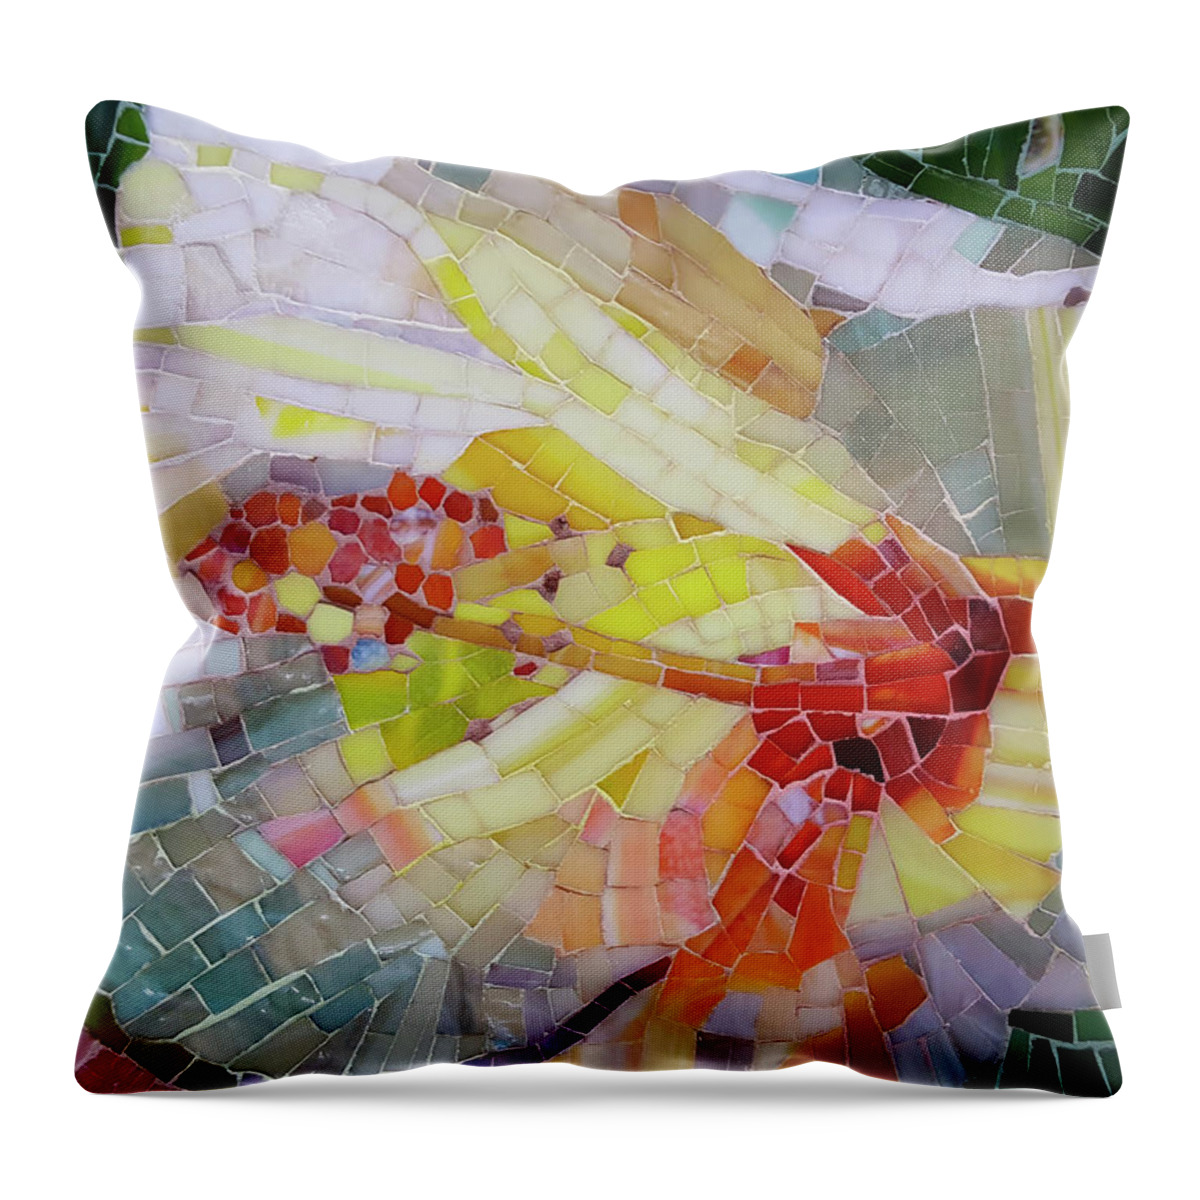 Hibiscus Throw Pillow featuring the mixed media Hibiscus #1 by Adriana Zoon